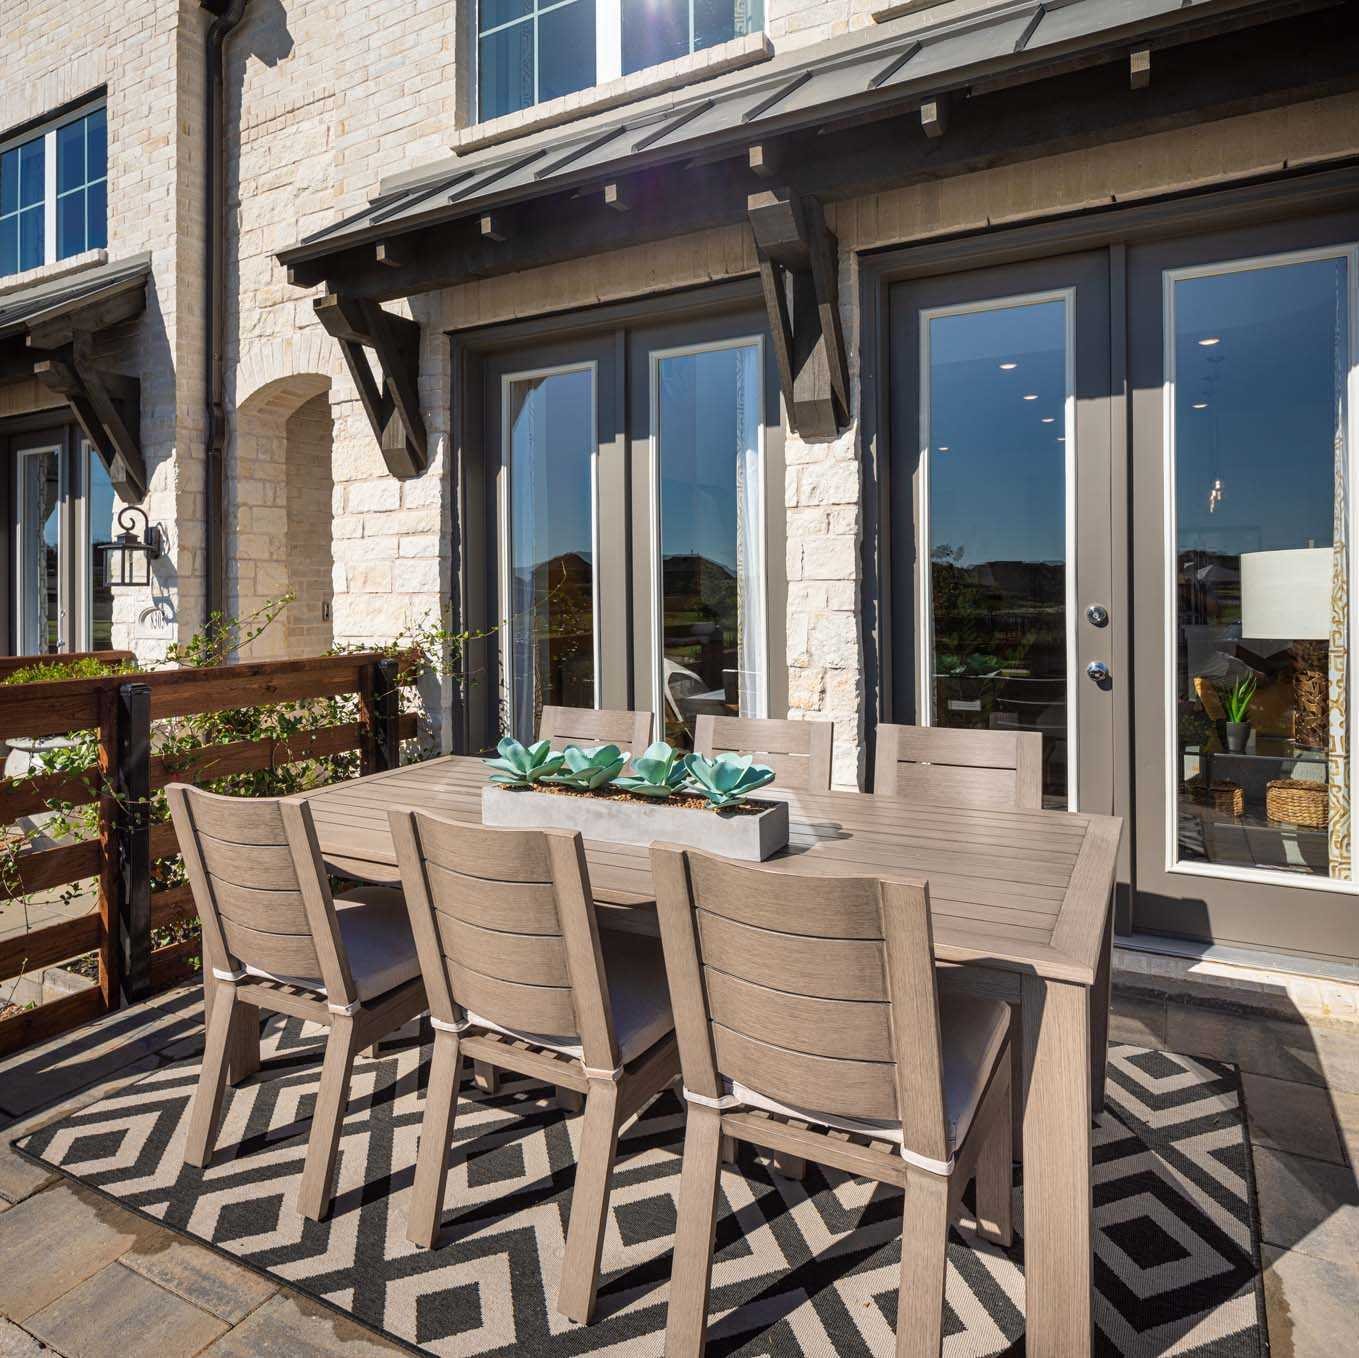 30. Walsh: Townhomes - The Patios